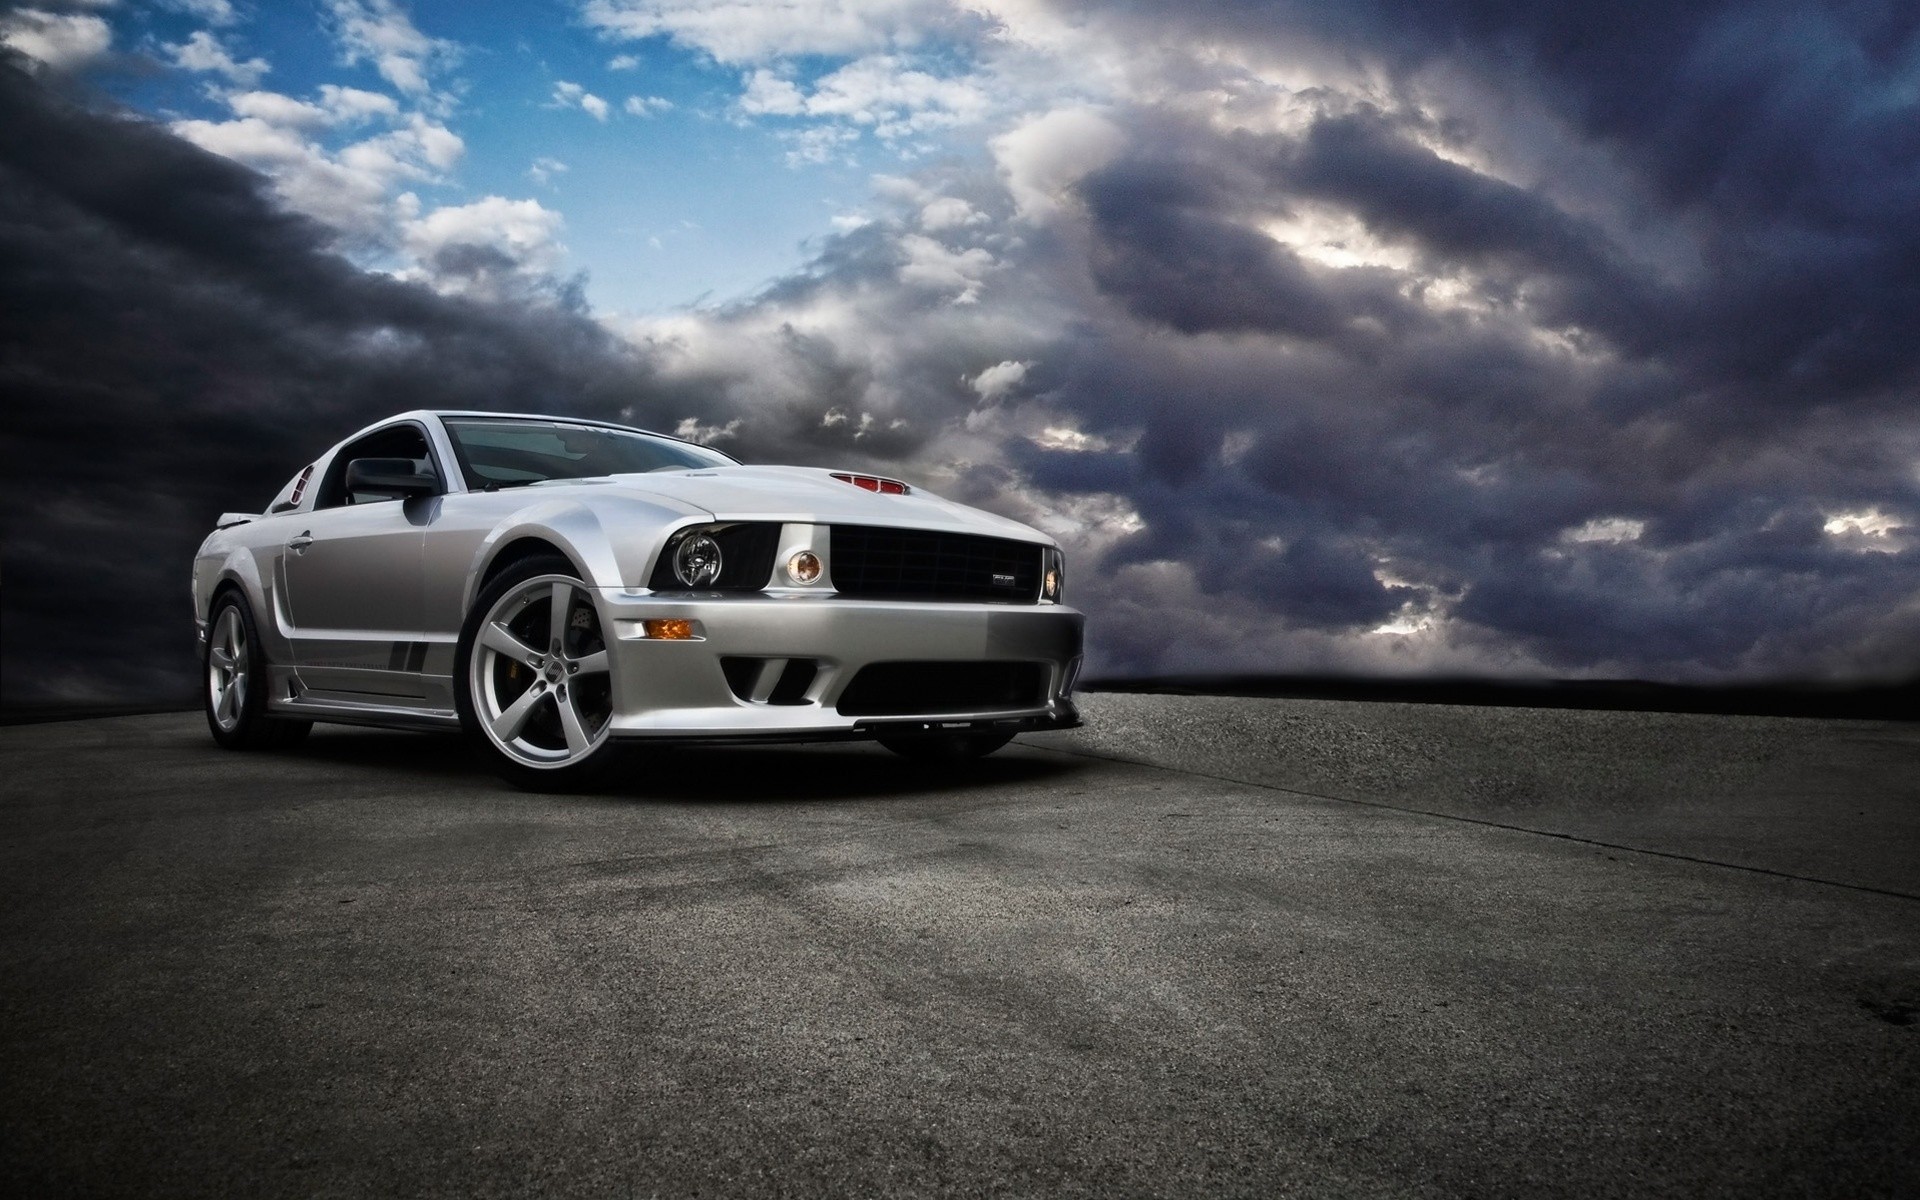 Ford Mustang Tuning - Android wallpapers